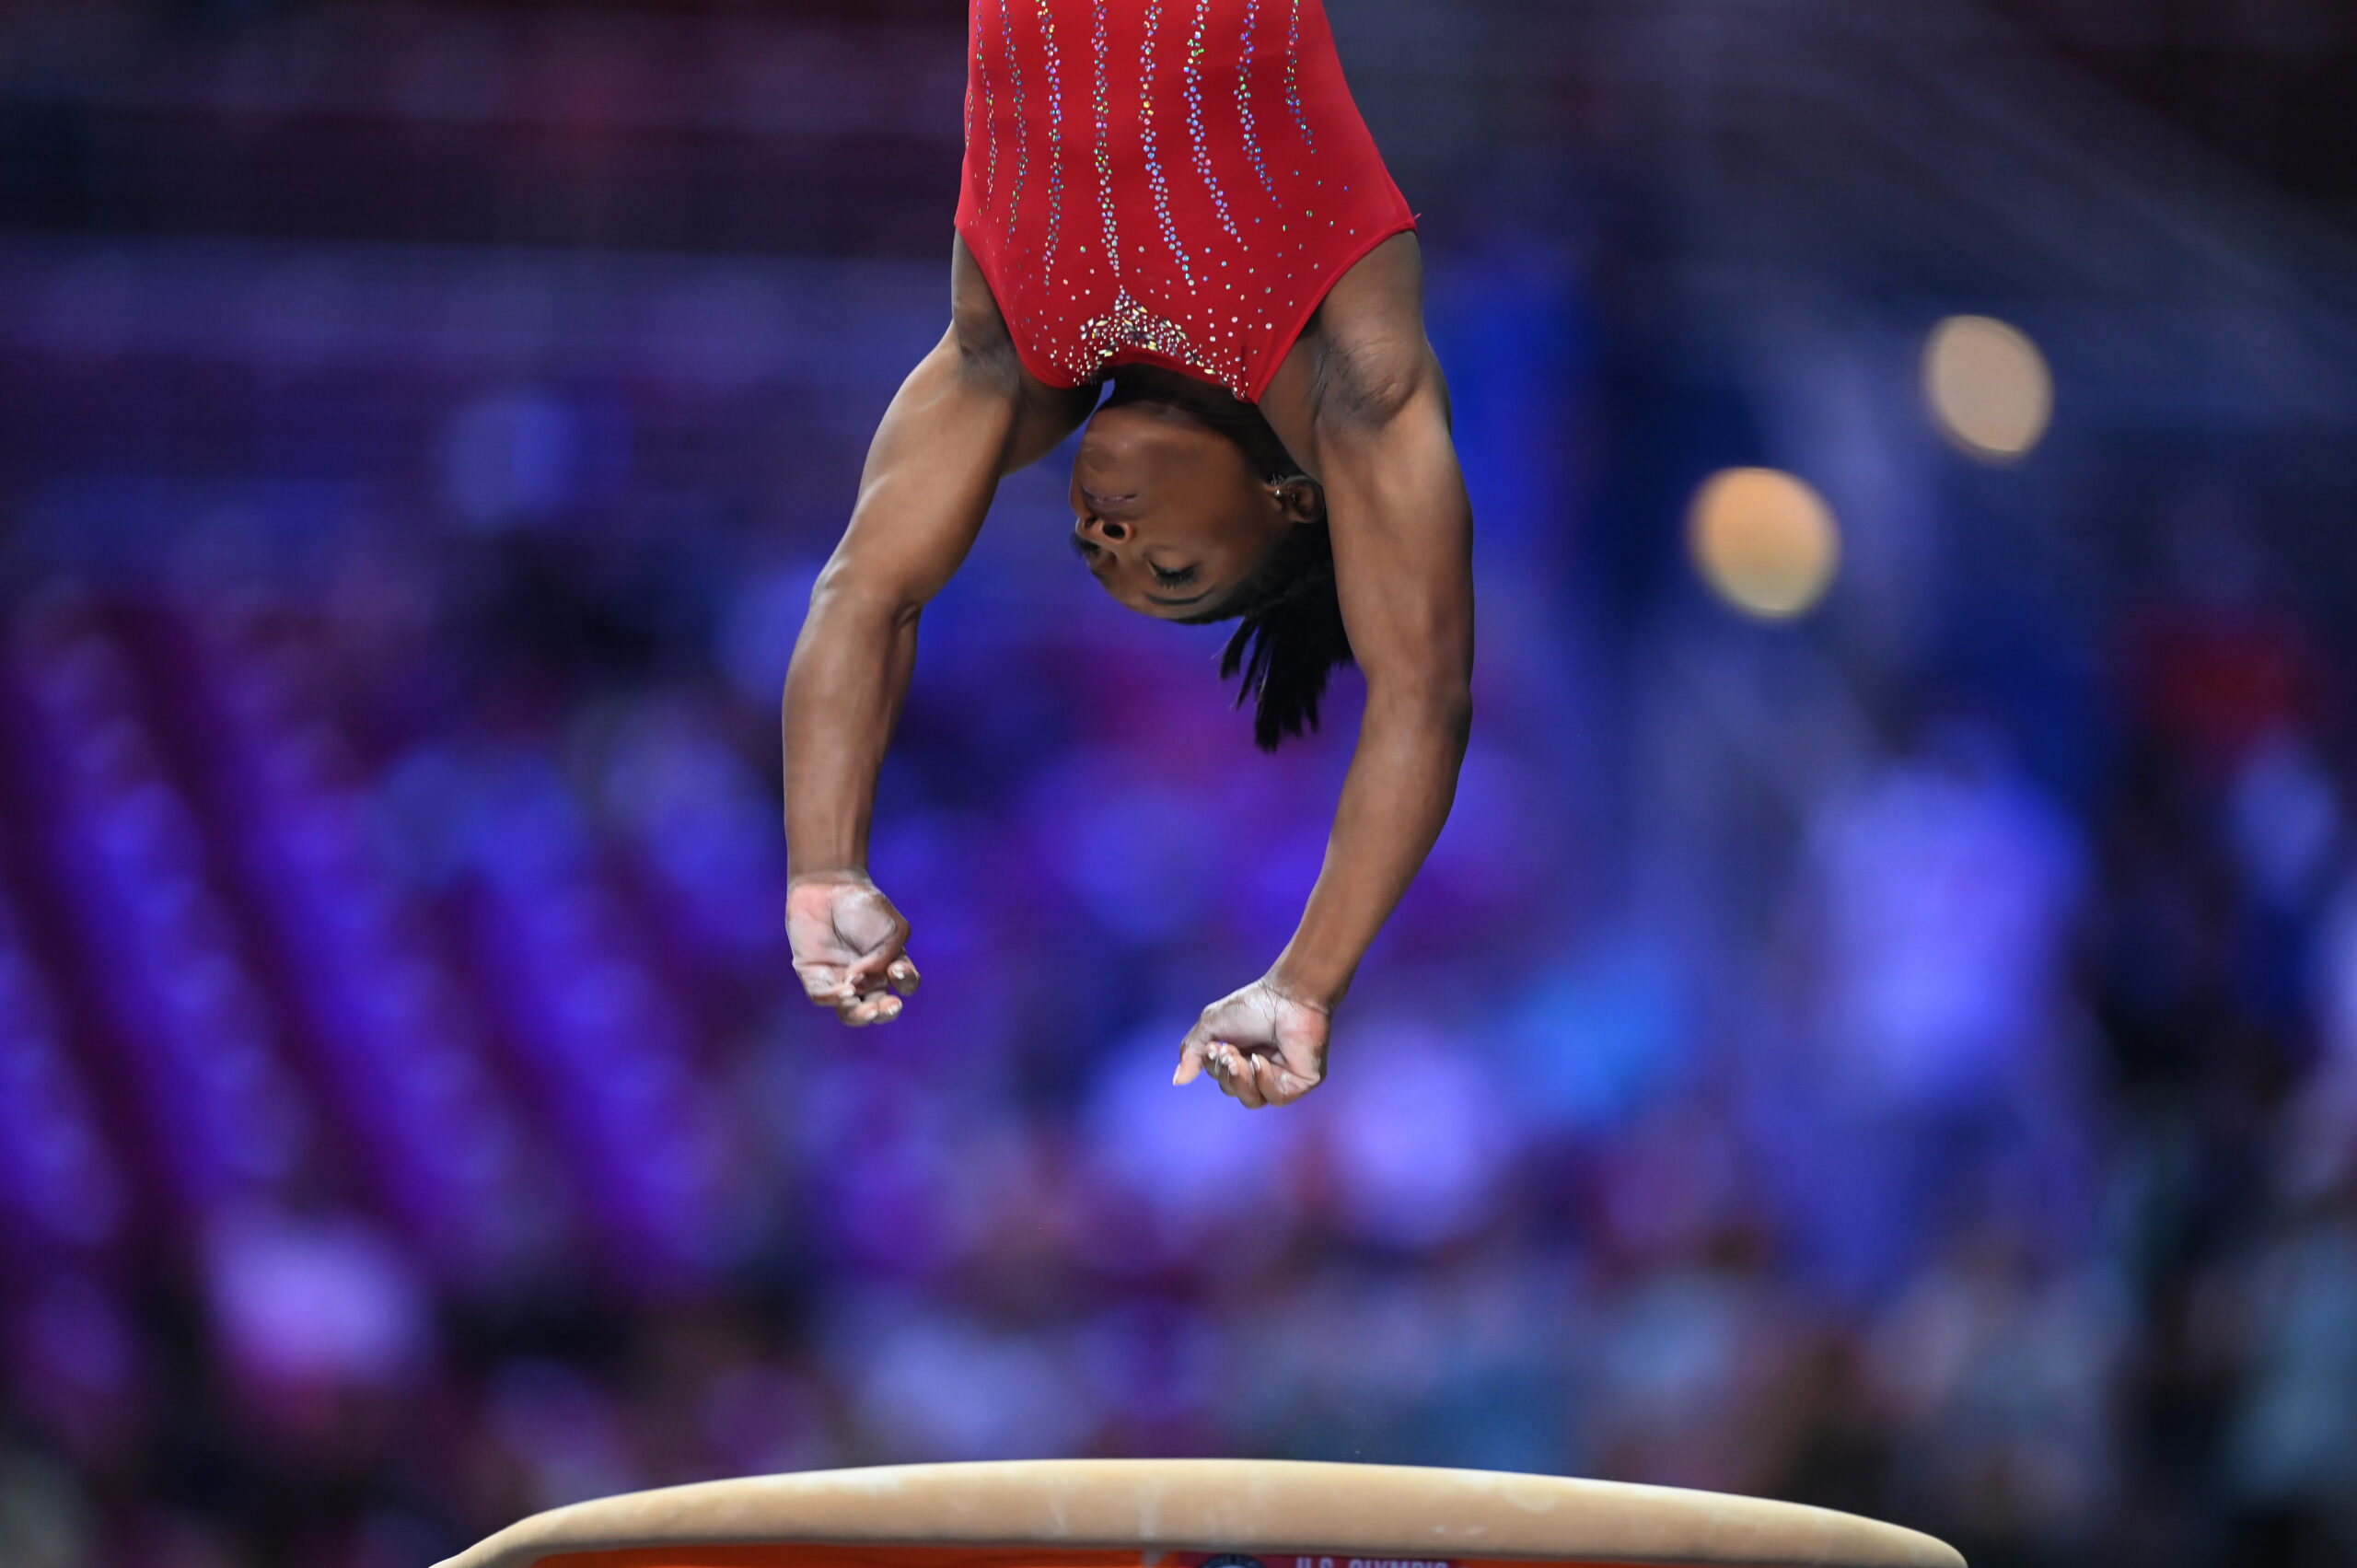 Simone Biles on vault during training before Day 2 of the 2021 U.S. Gymnastics Olympic Trials.